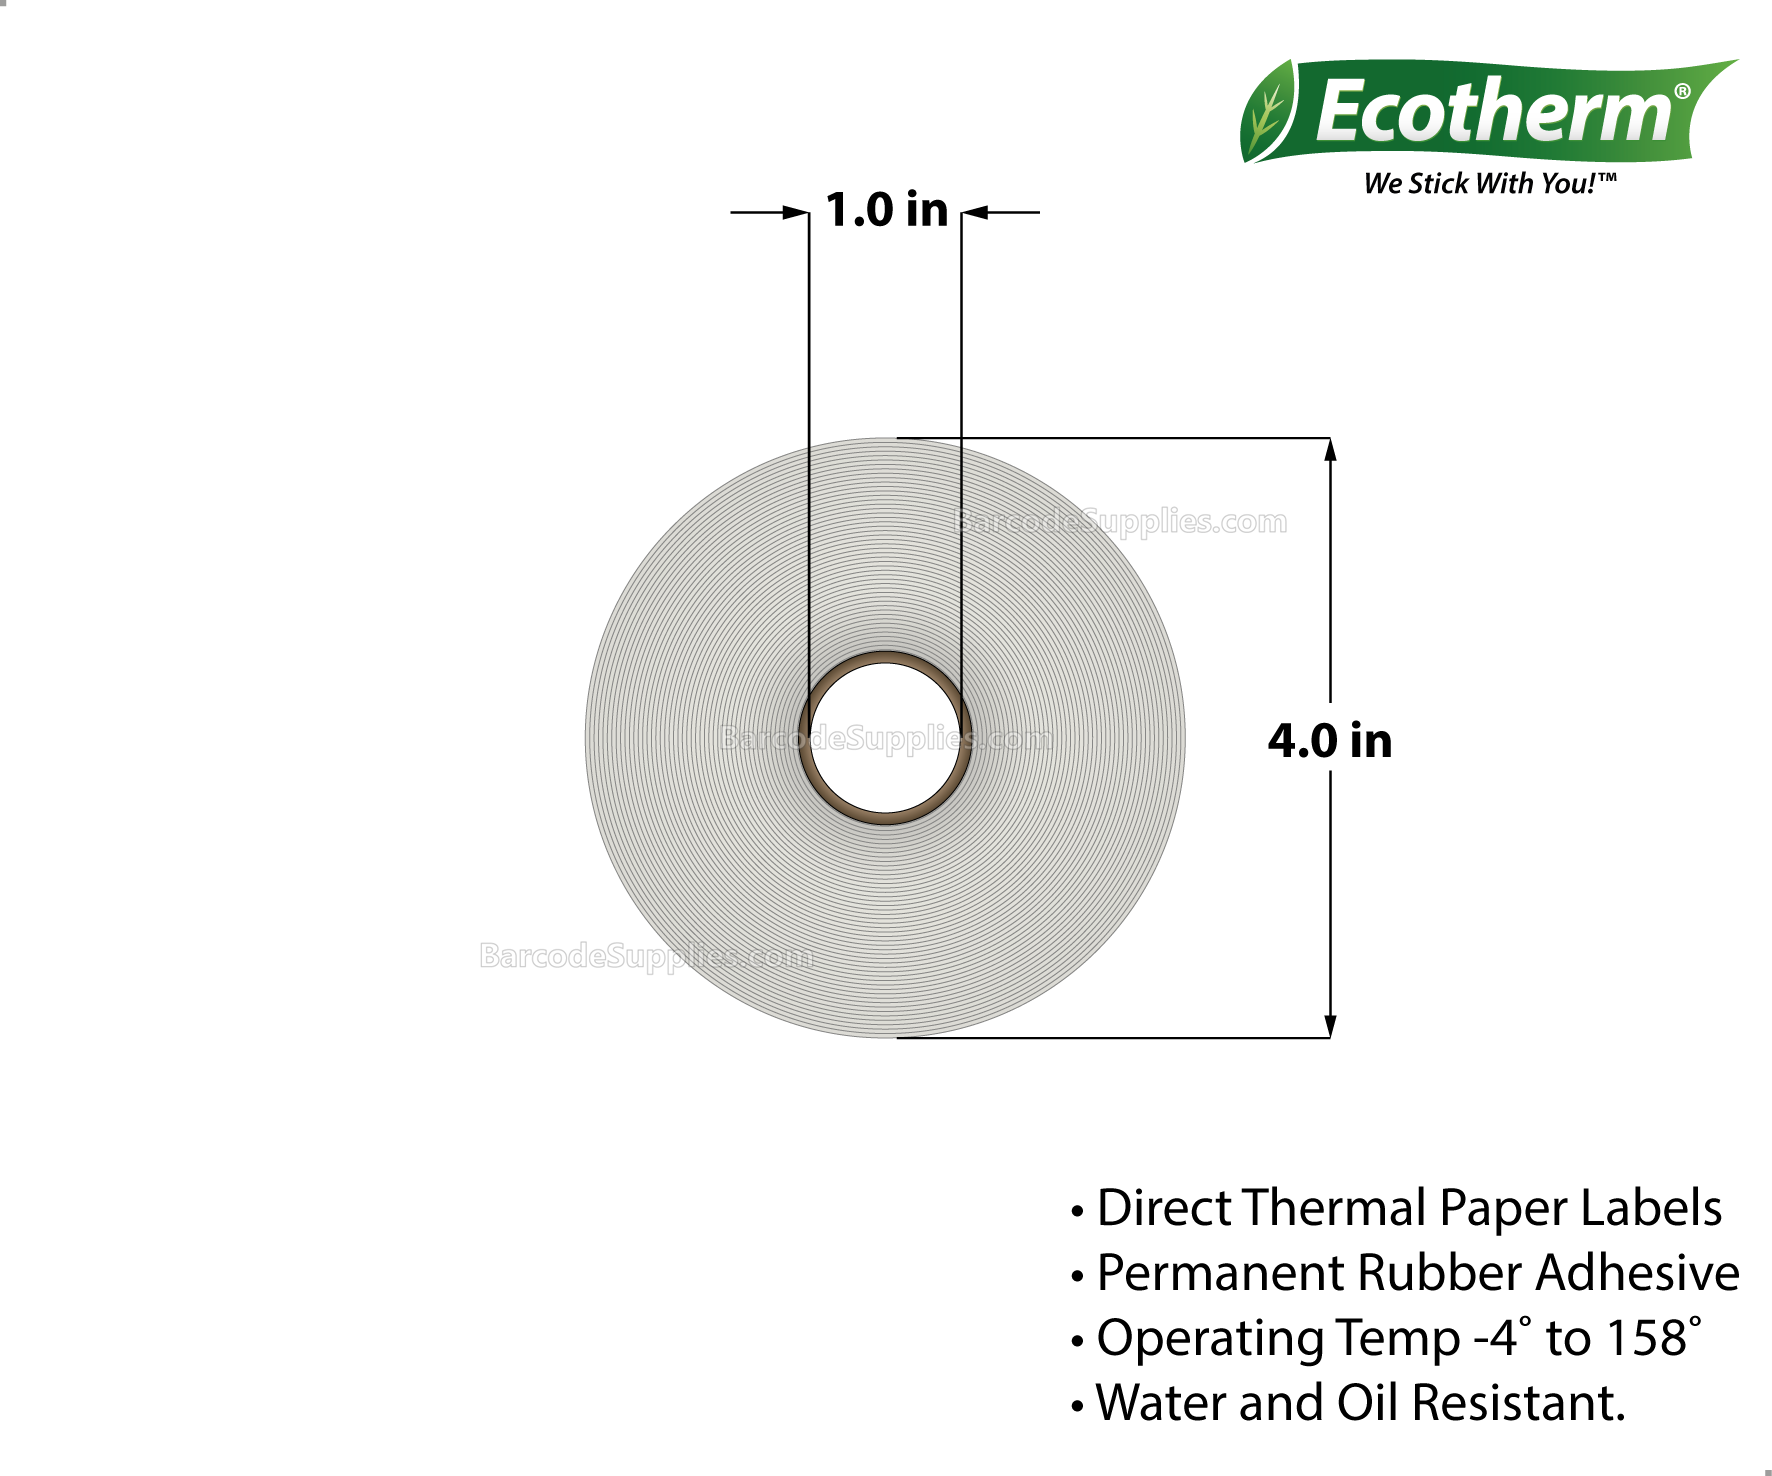 4 x 6 Direct Thermal White Labels With Rubber Adhesive - Perforated - 275 Labels Per Roll - Carton Of 4 Rolls - 1100 Labels Total - MPN: ECOTHERM14129-4